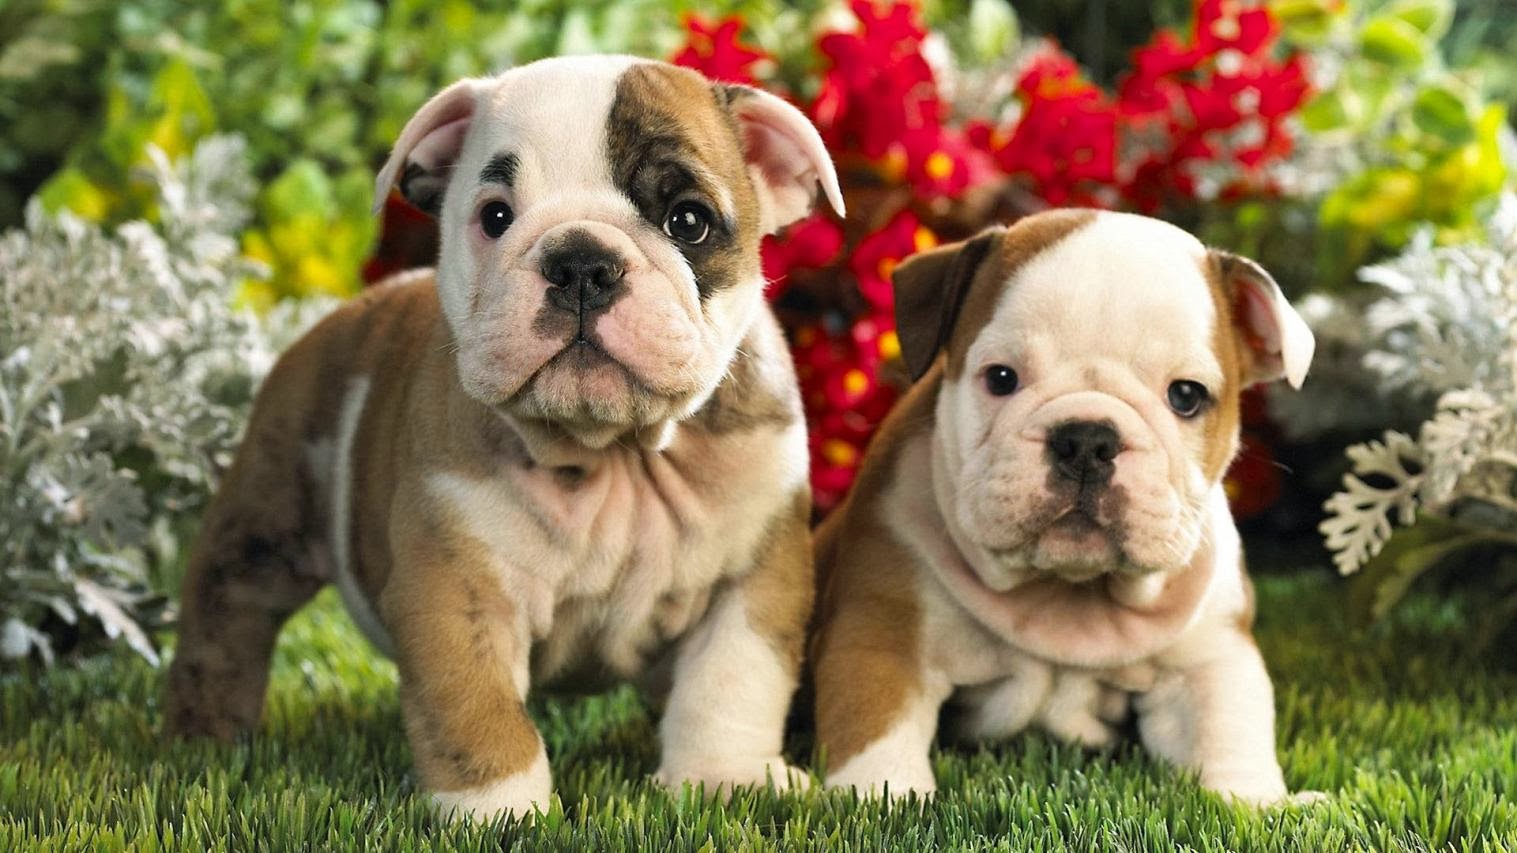 Cute Puppies With Flowers Wallpaper High Quality